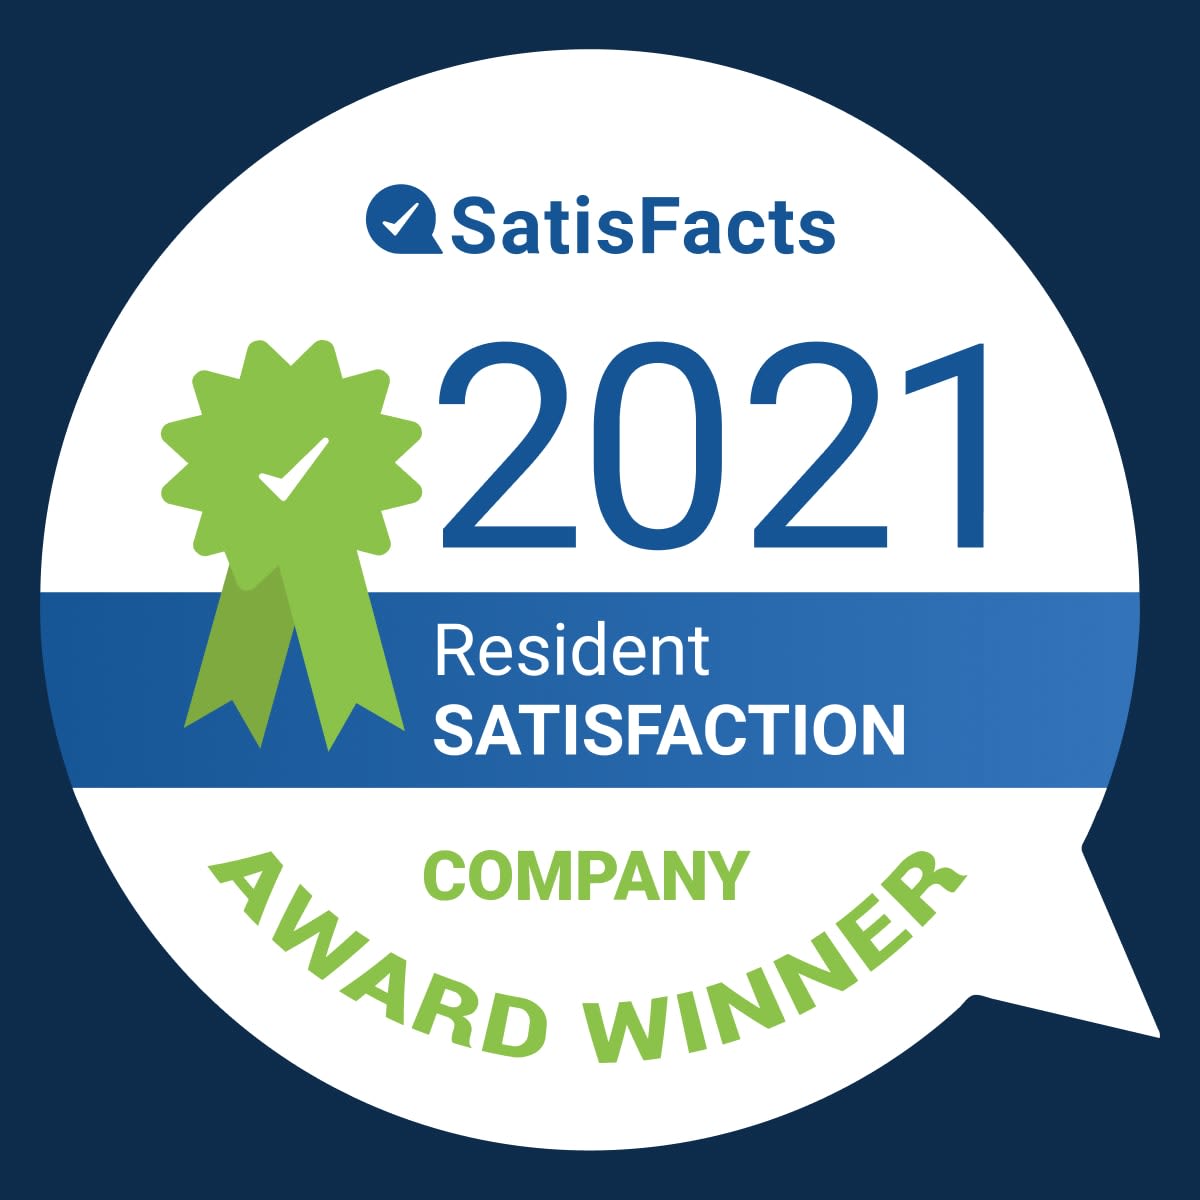 Satisfacts badge for Pavilions at Northshore in Portland, Texas